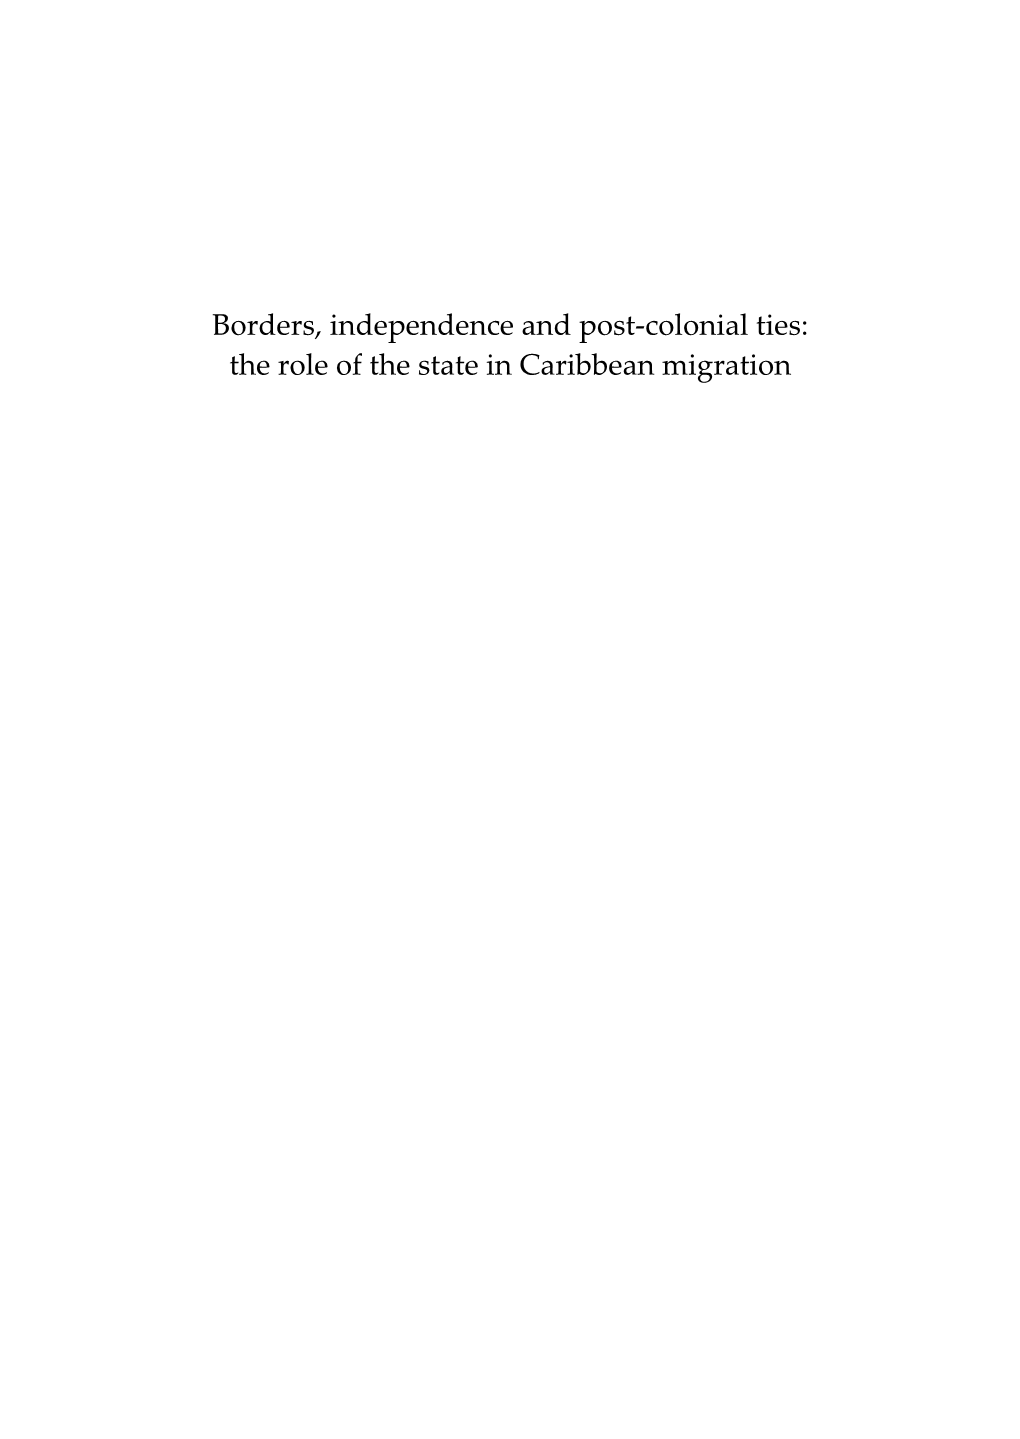 Borders, Independence and Post-Colonial Ties: the Role of the State in Caribbean Migration